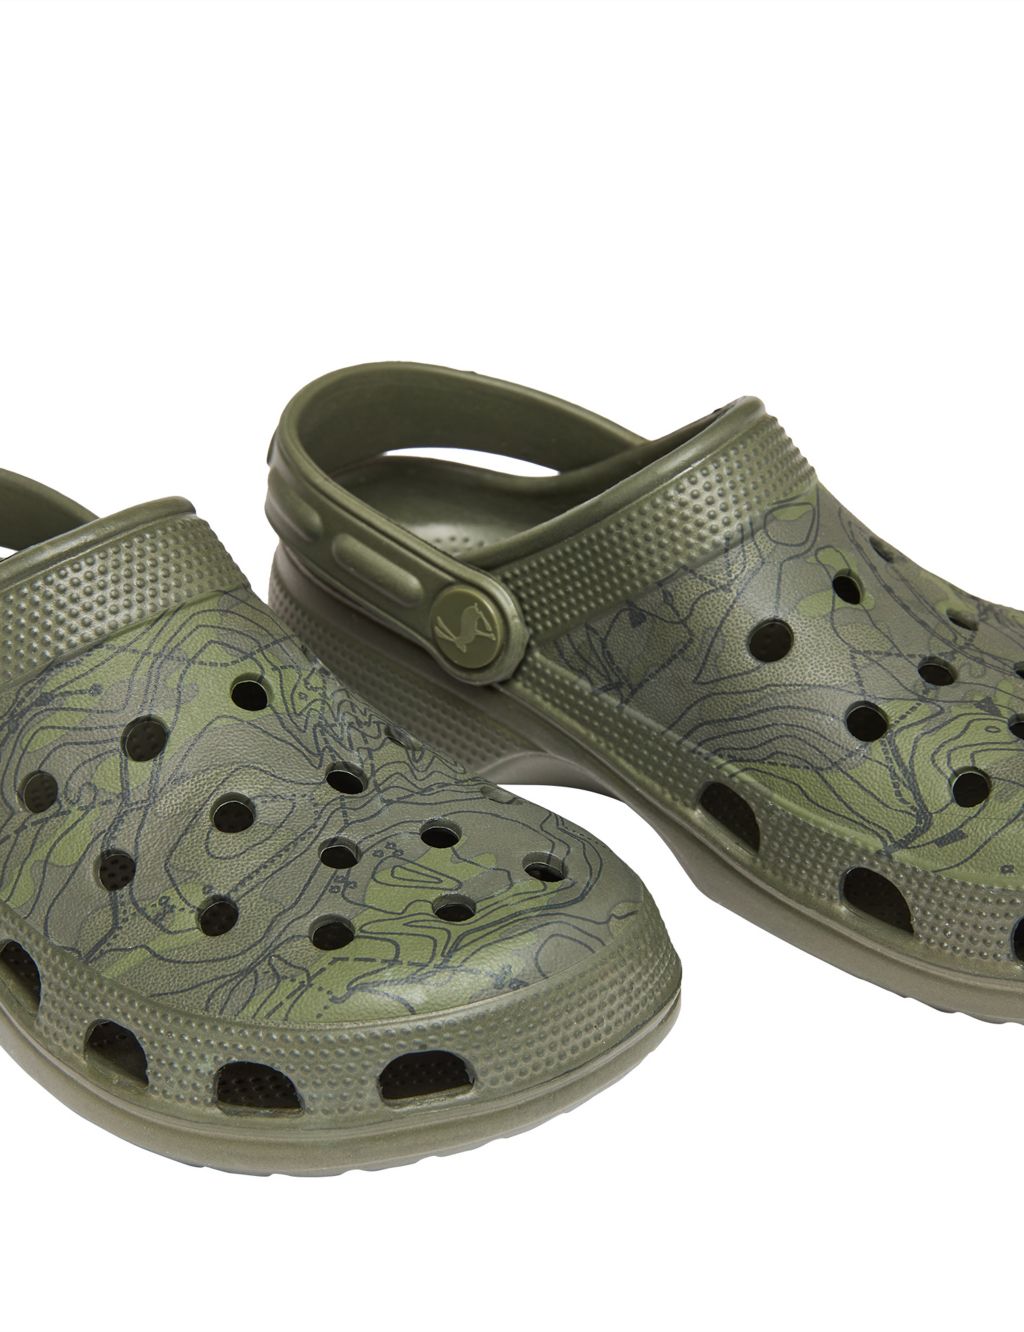 Kids' Slip-On Camouflage Clogs (8 Small-3 Large) image 3